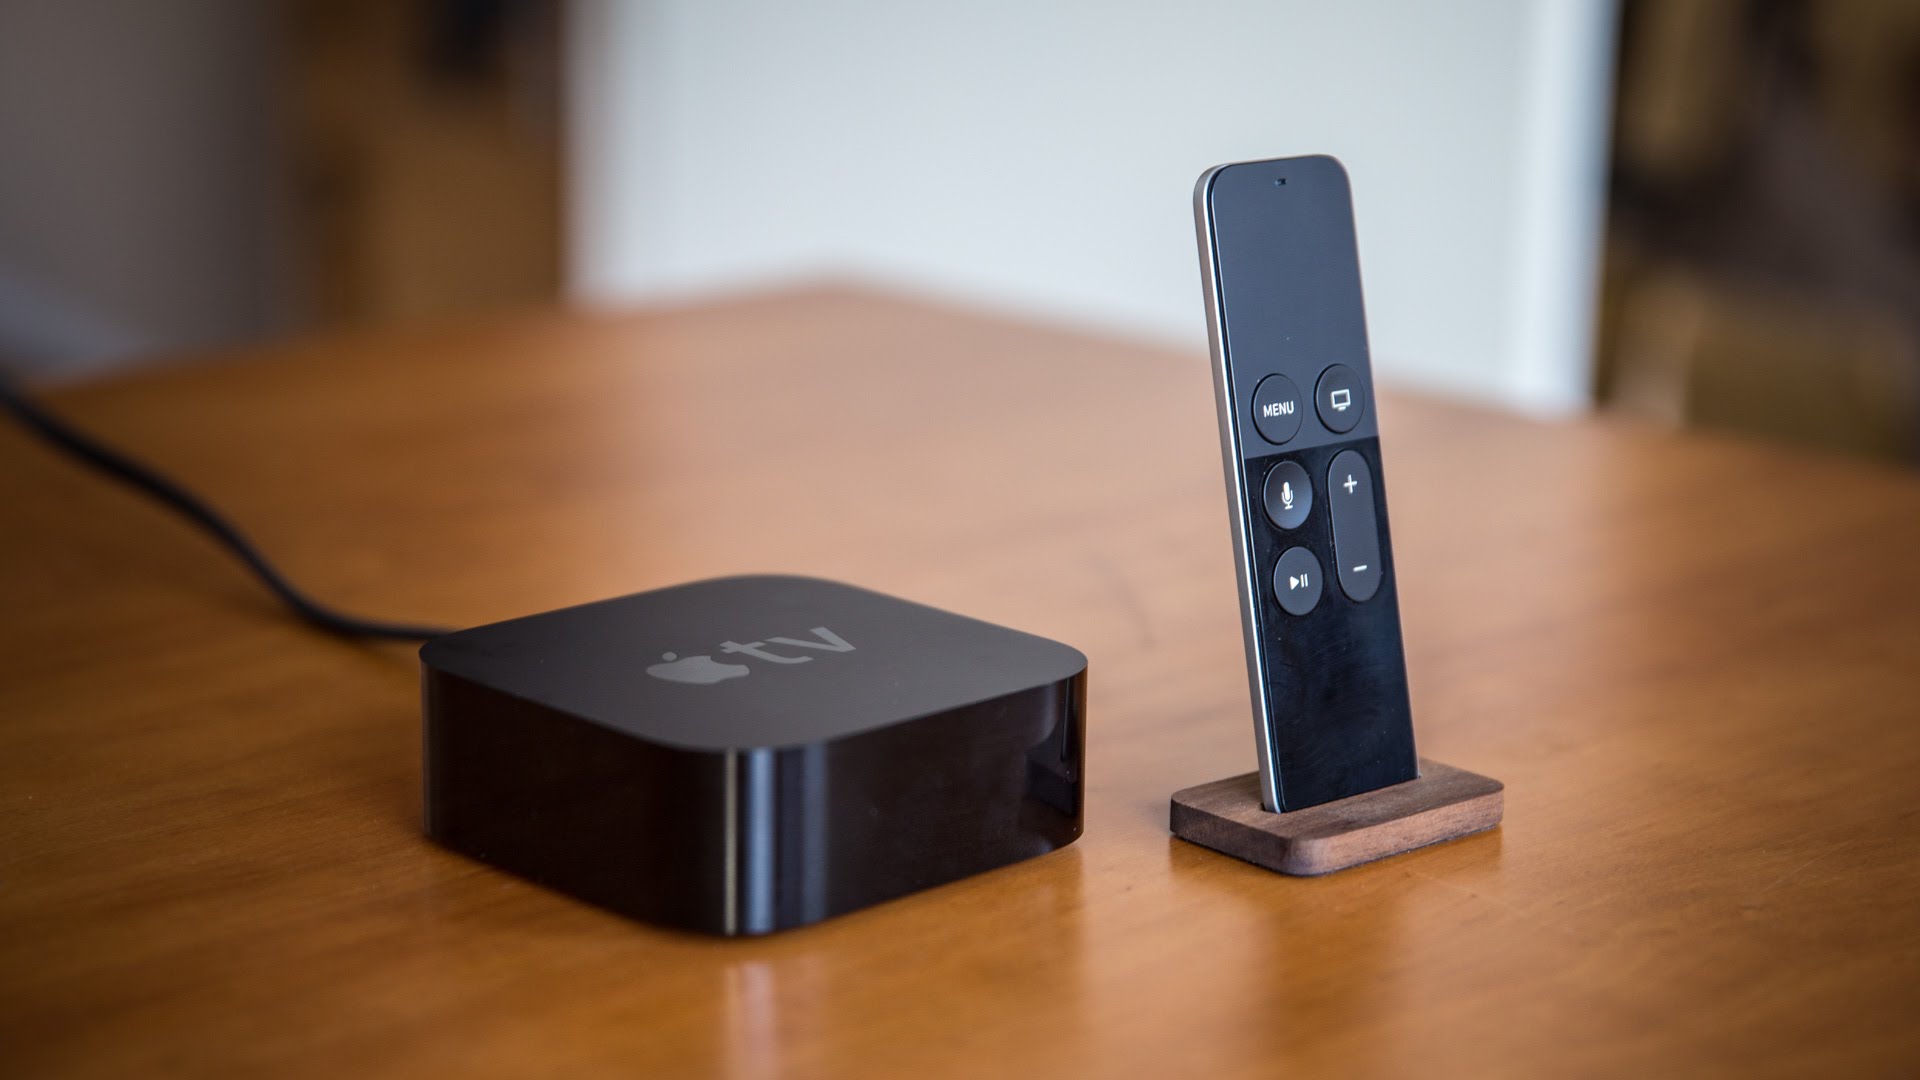 Apple TV is designed to stream TV shows and movies to your HDTV